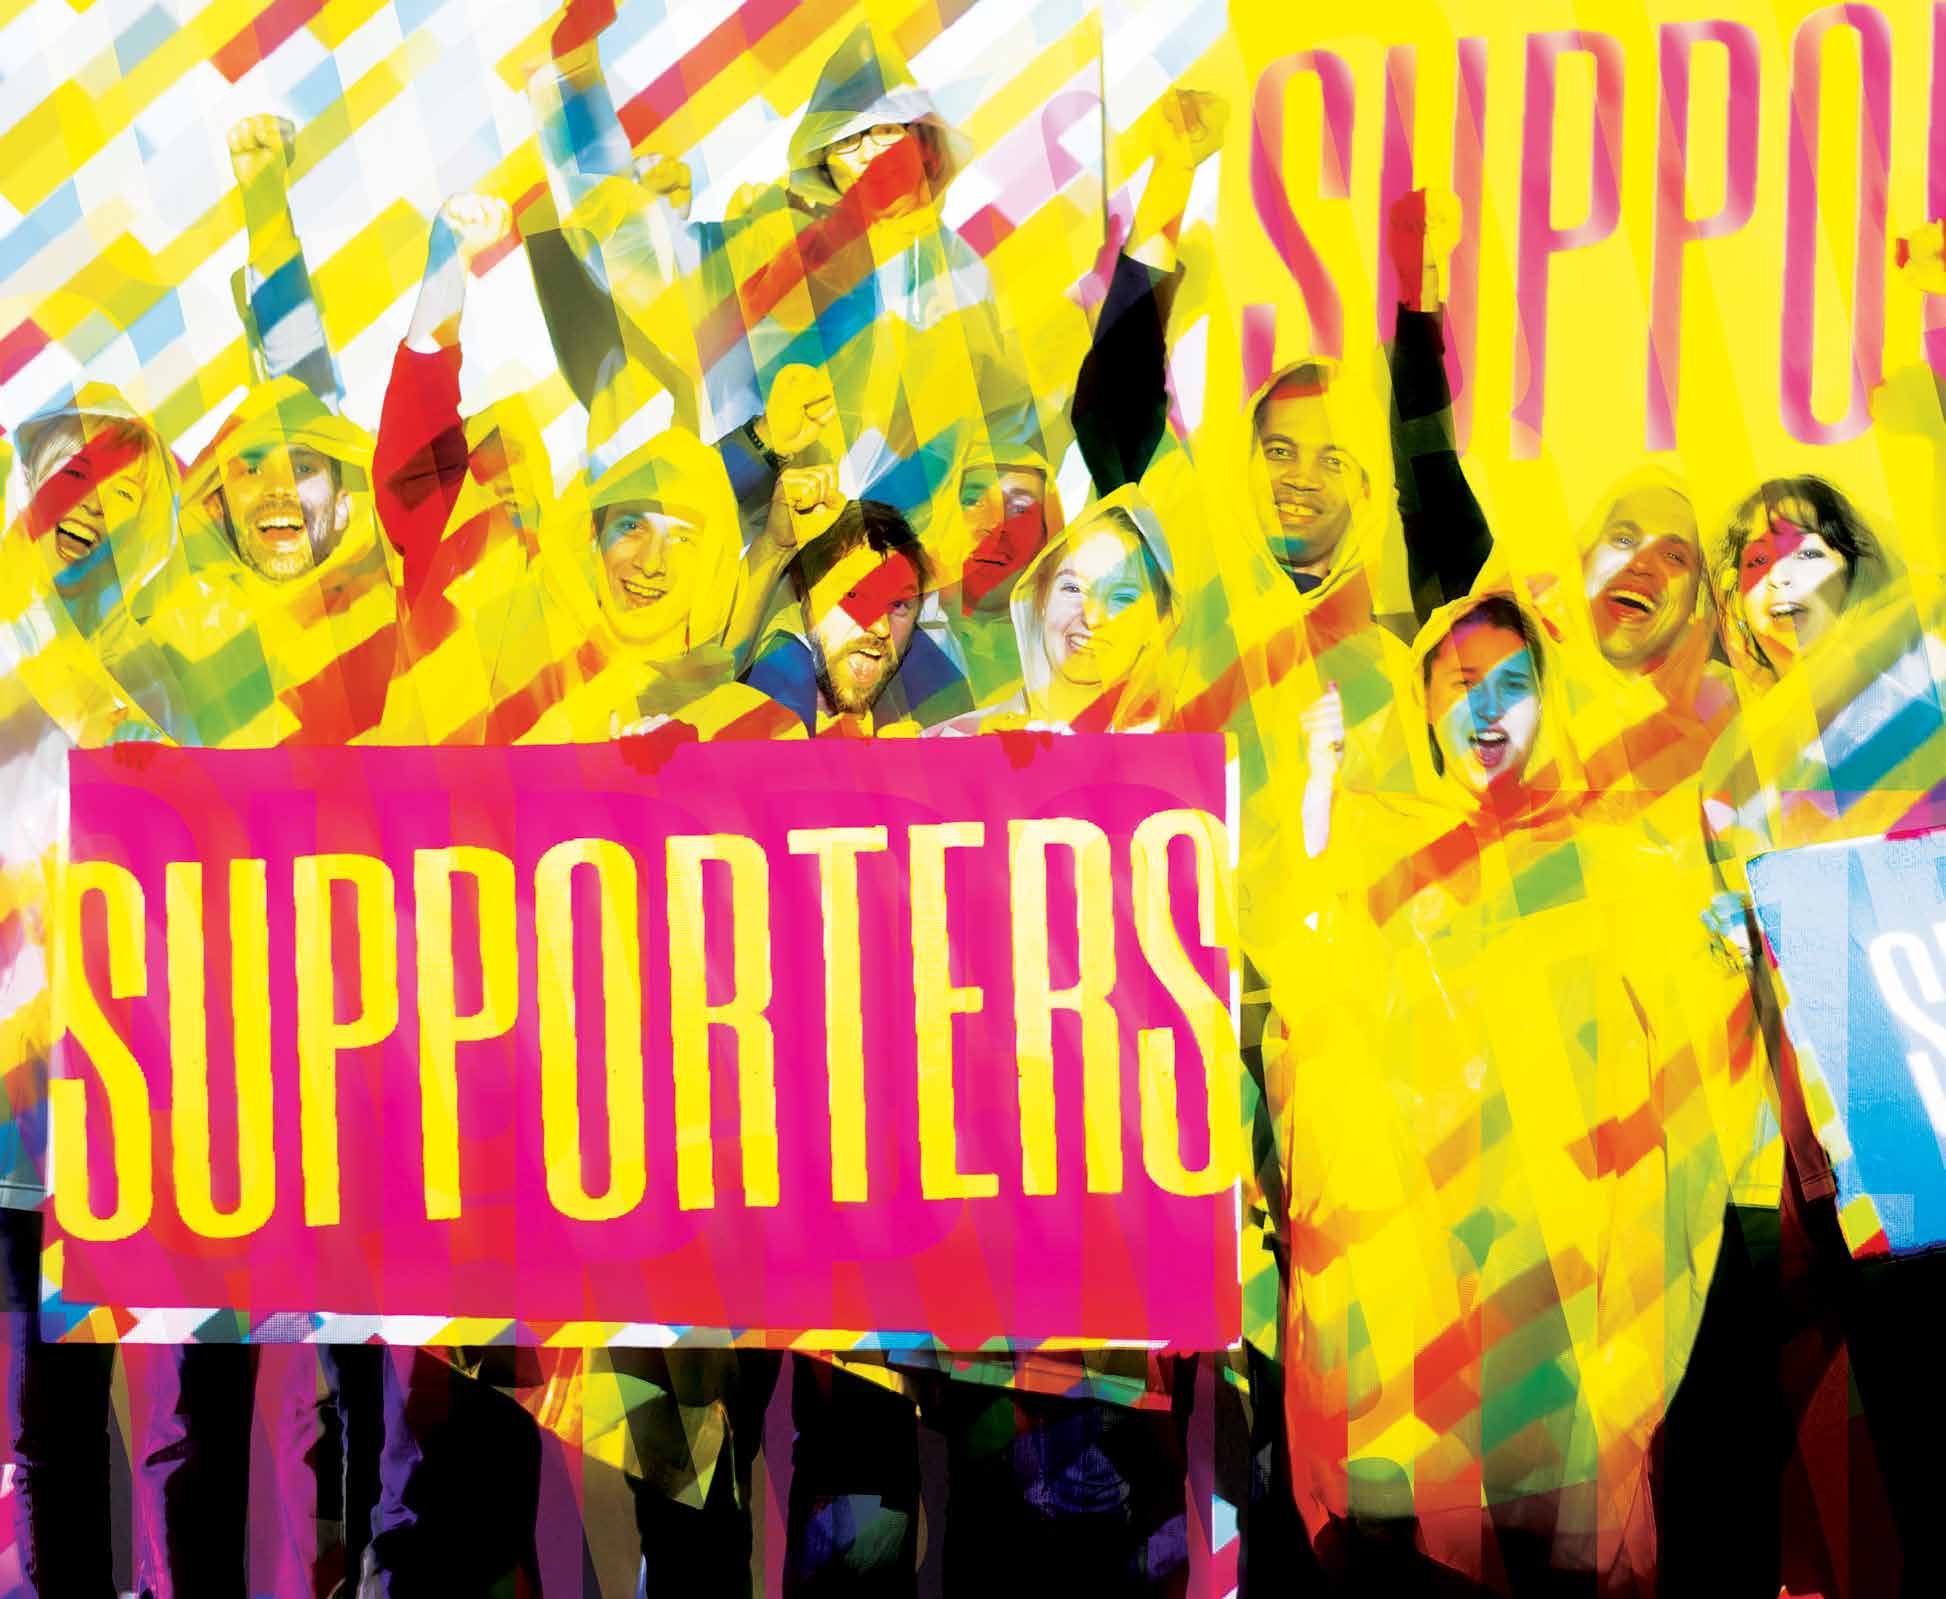 SUPPORTERS T-SHIRTS